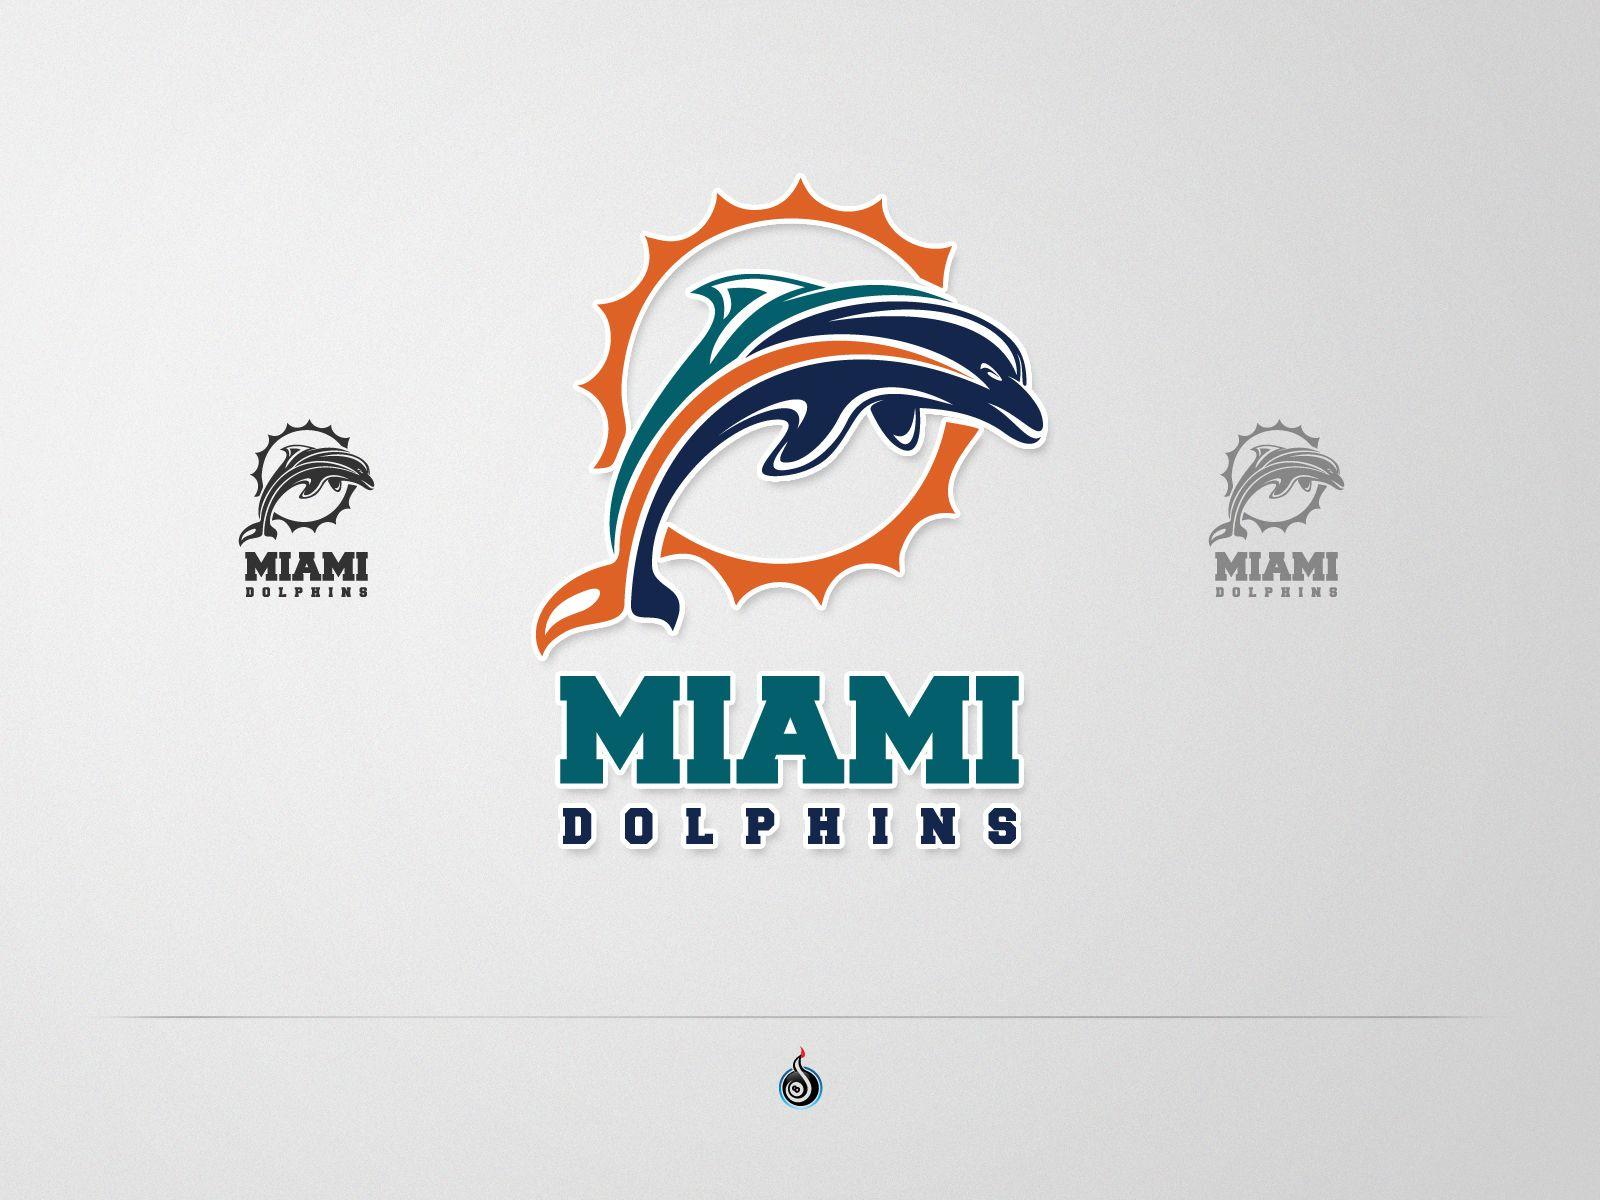 NFL Dolphins Logo - Miami Dolphins New Logo: Top Design Possibilities For The Team's ...